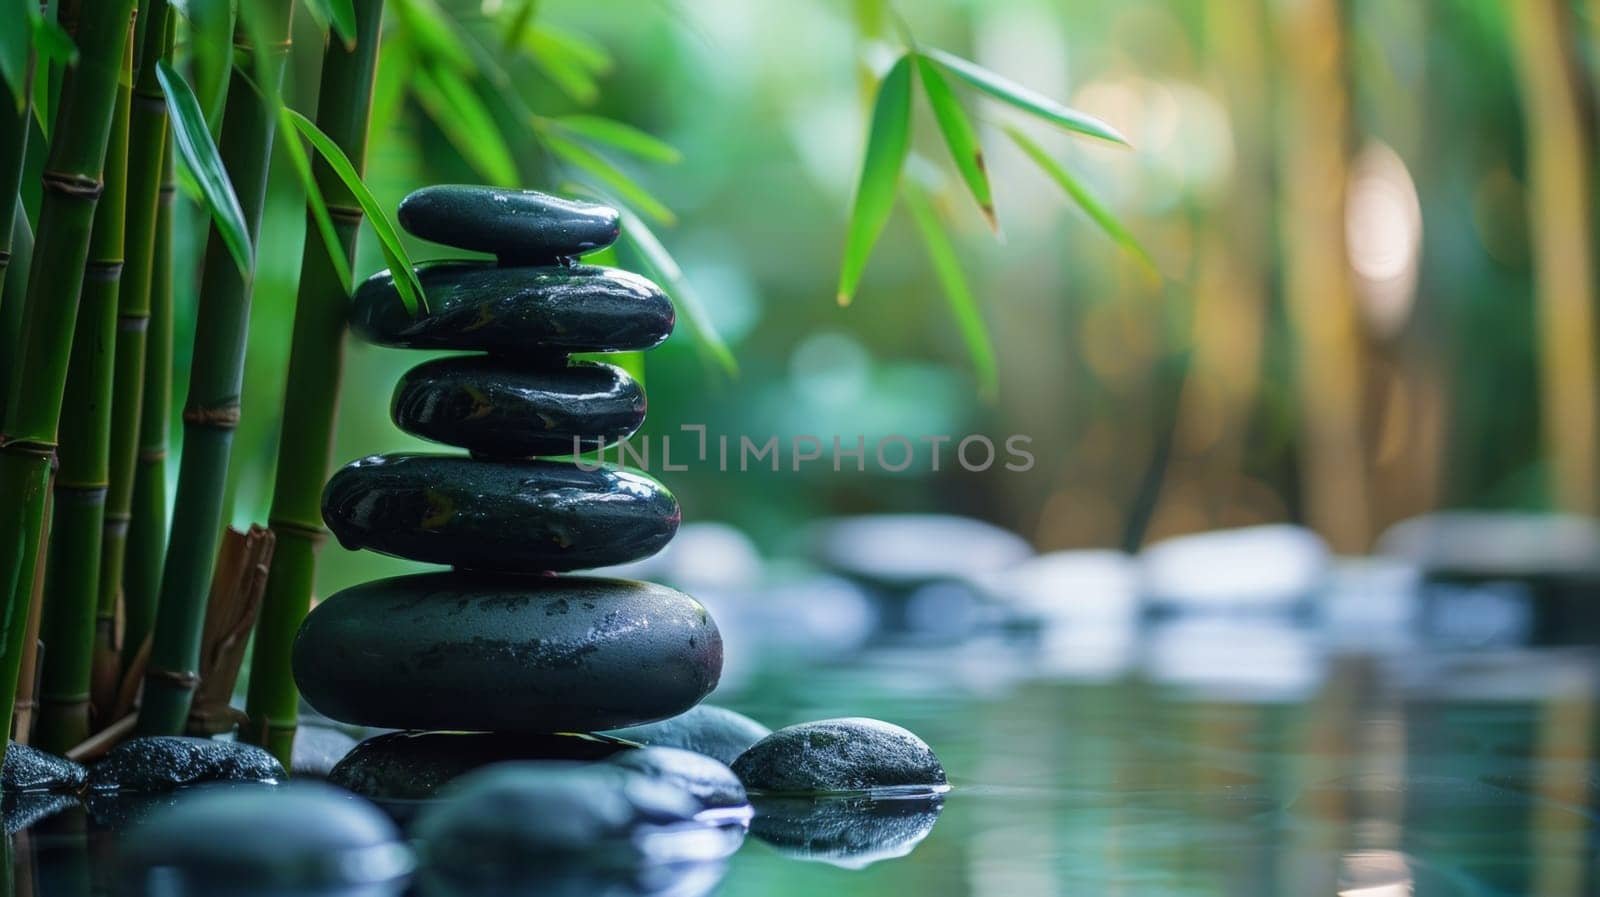 A stack of rocks sitting next to a bamboo tree